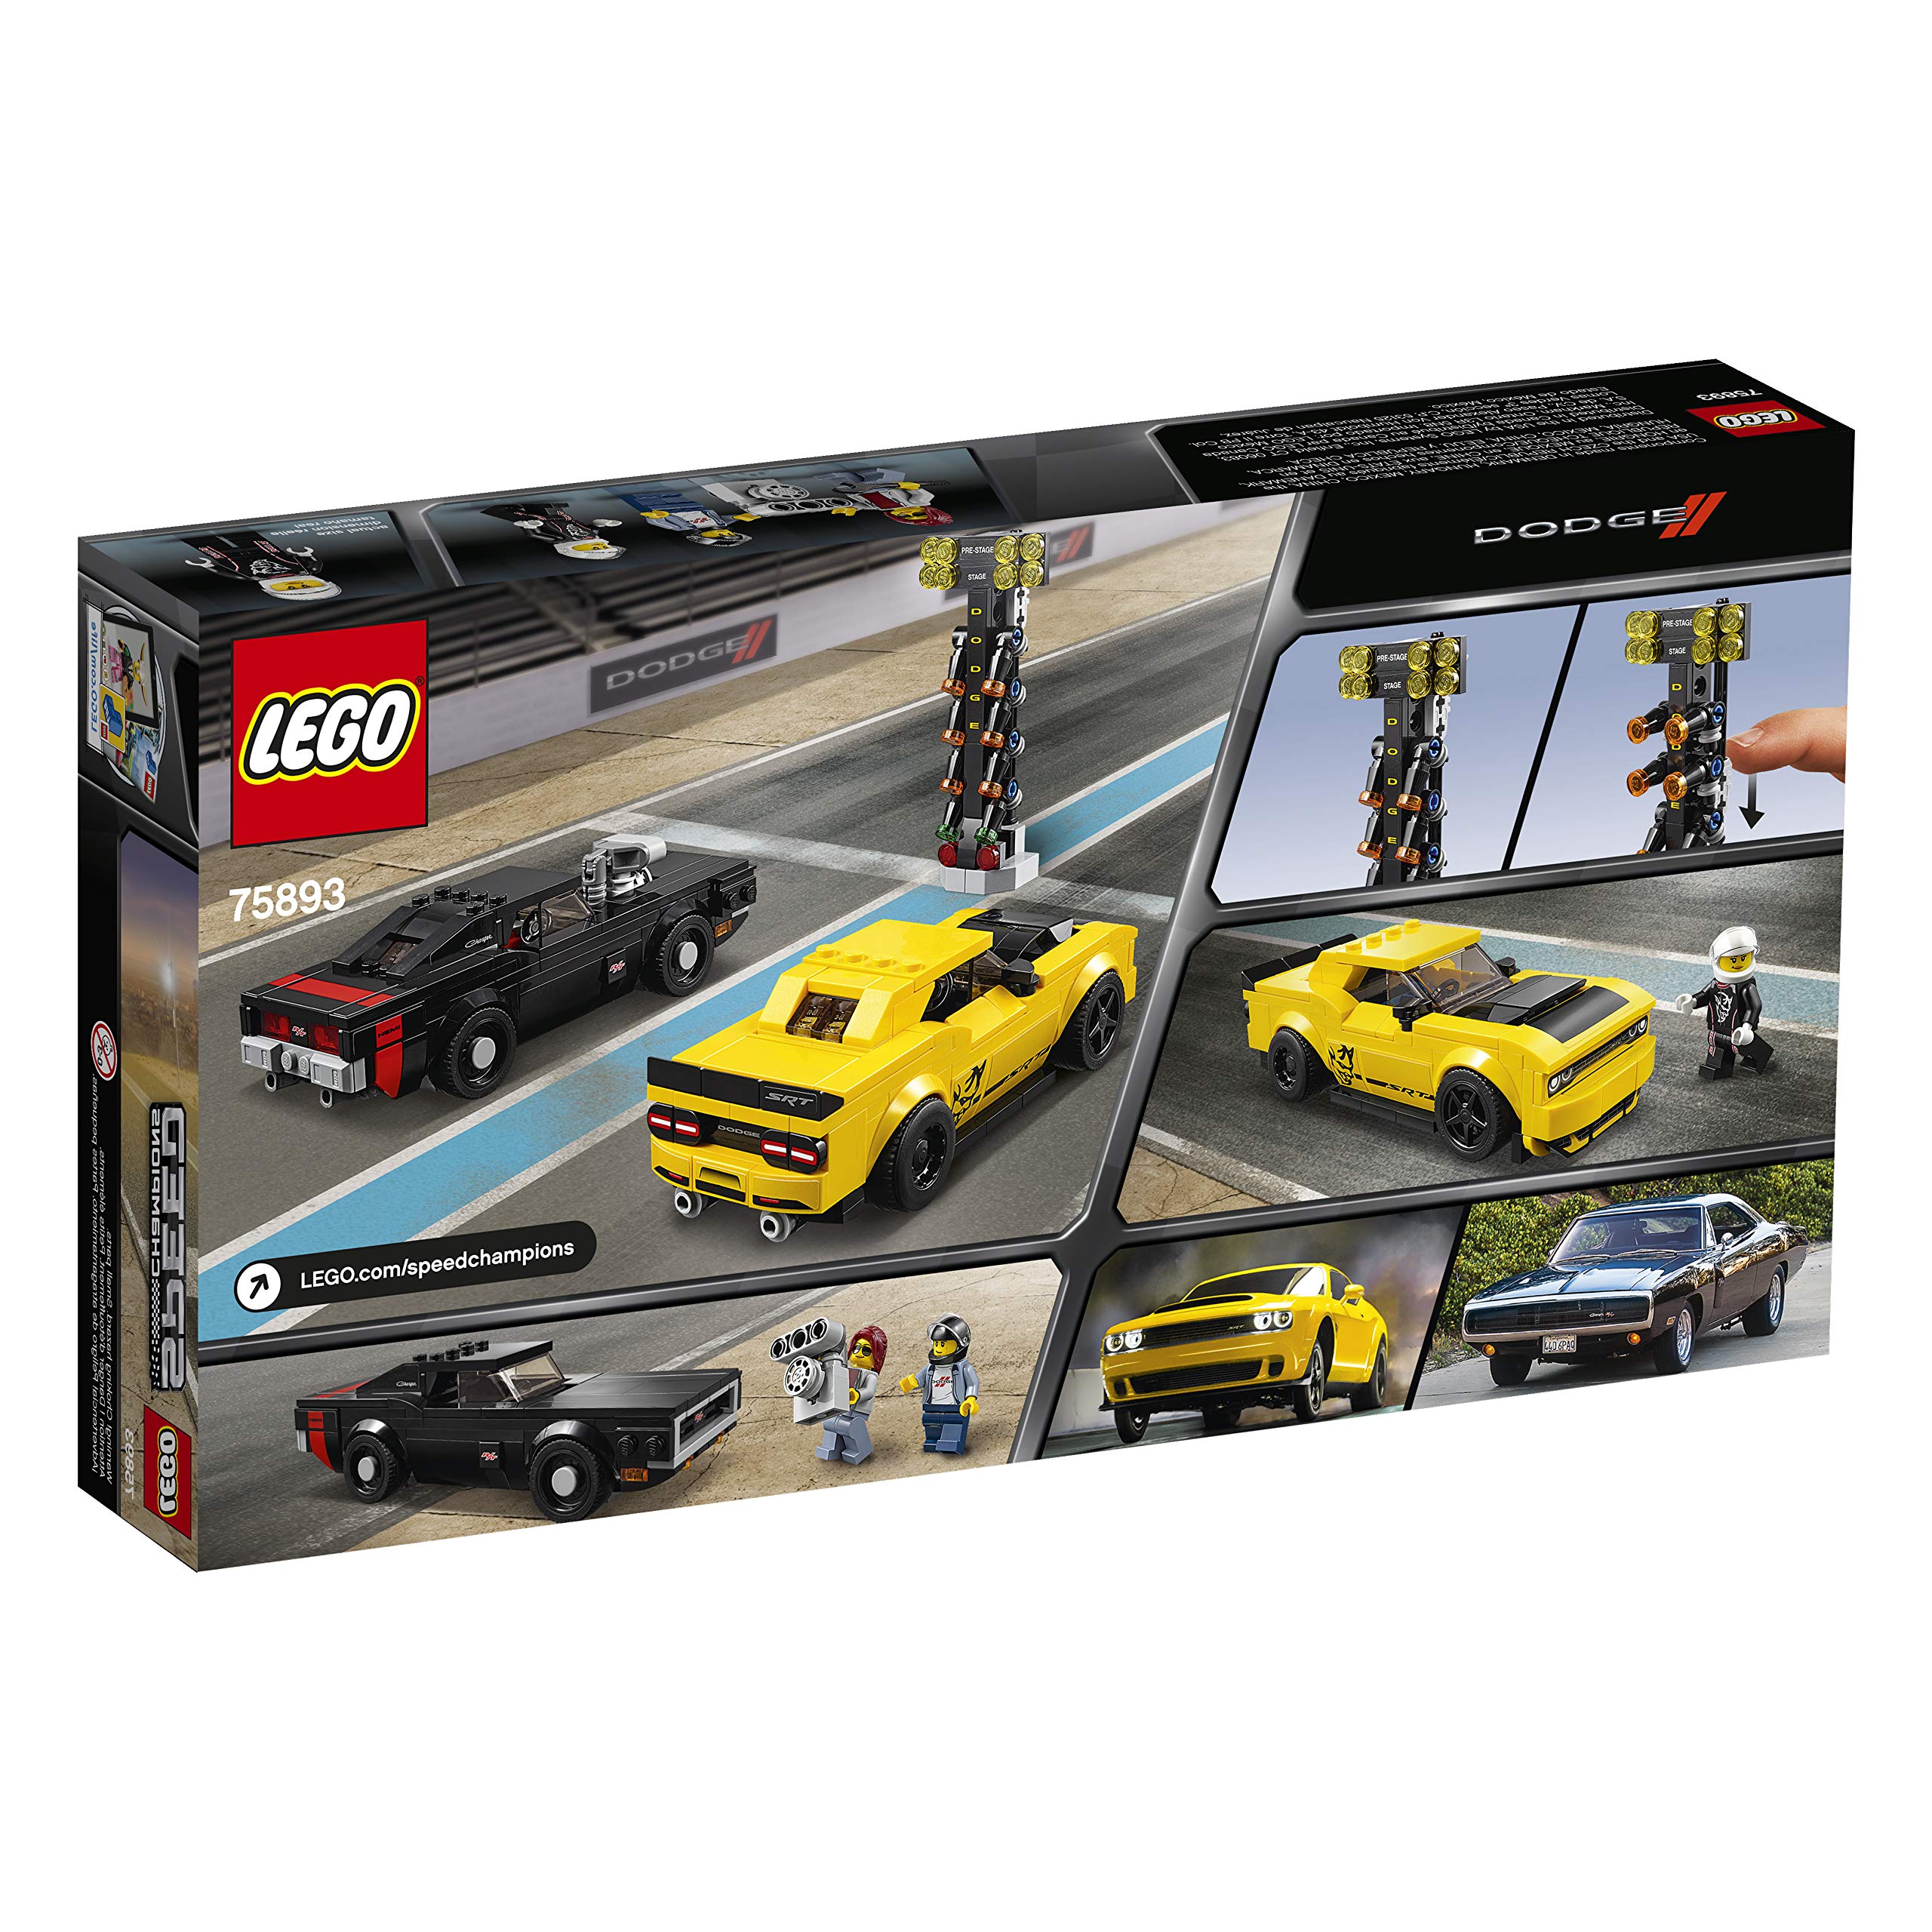 LEGO Speed Champions 2018 Dodge Challenger SRT Demon and 1970 Dodge Charger R/T 75893 (478 Piece)